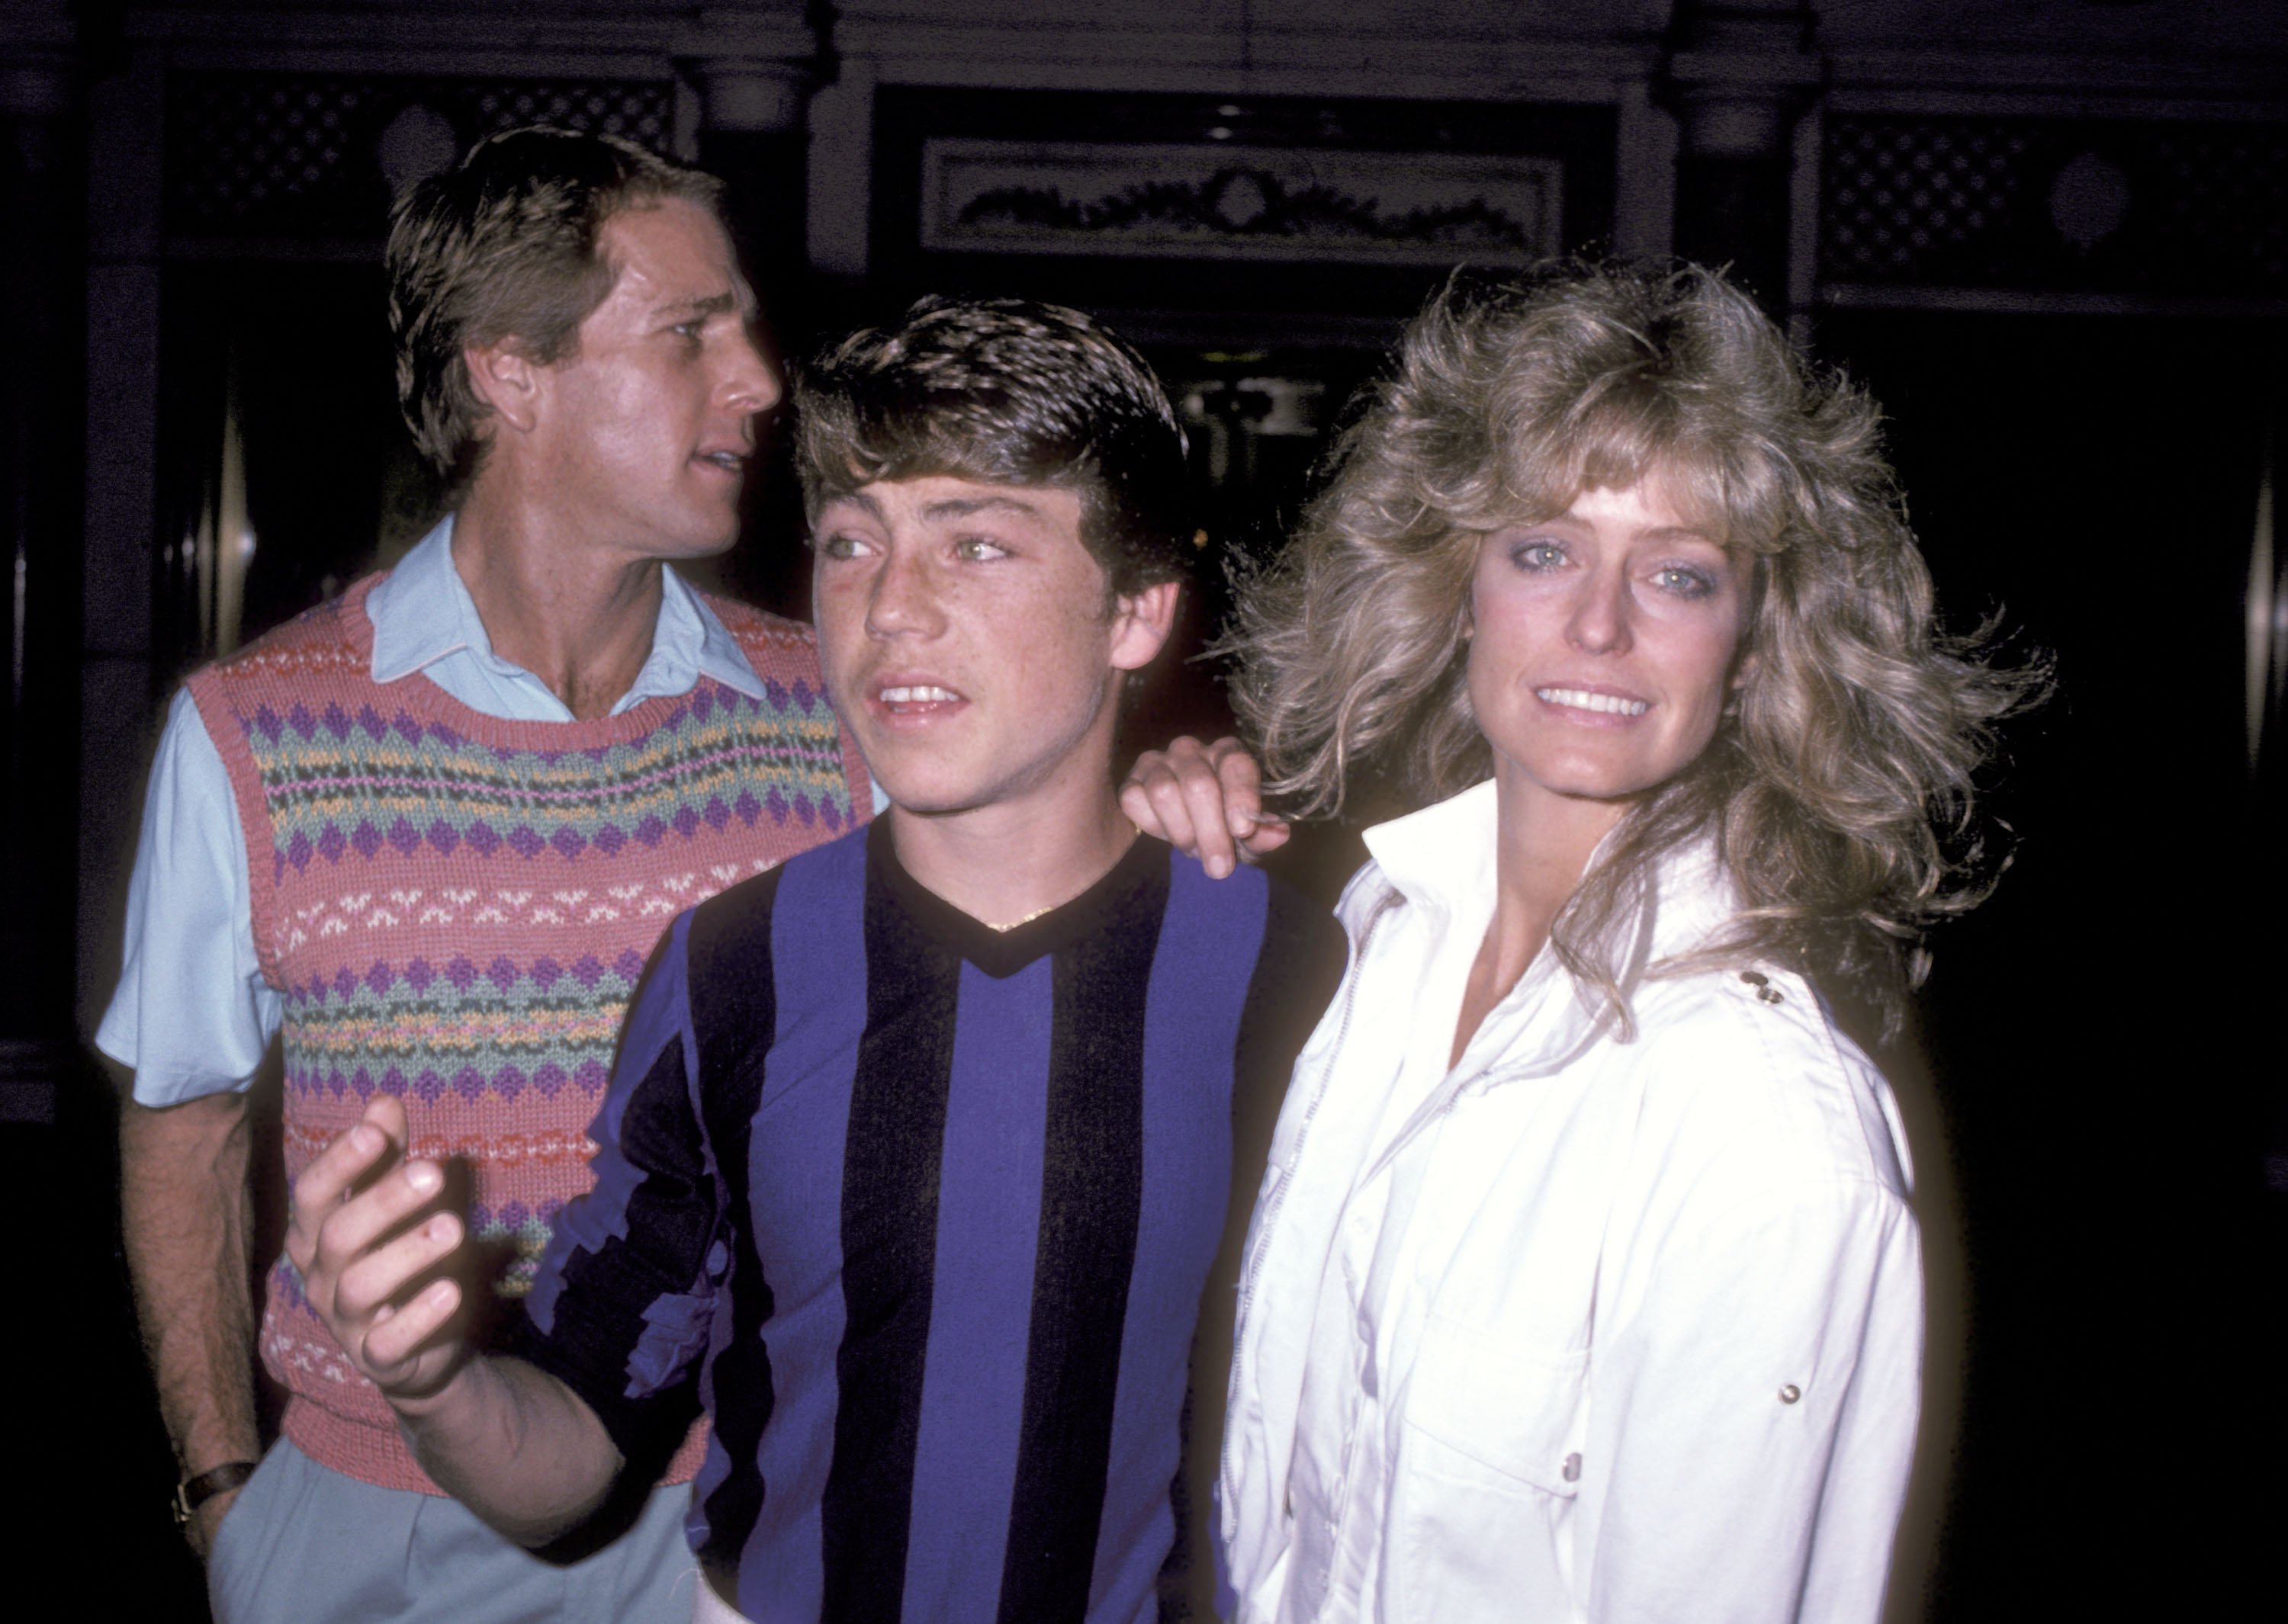 Actor Ryan O'Neal, his son Griffin O'Neal and actress Farrah Fawcett catch a performance of "Nine" at 42nd Street Theatre on June 16, 1982 in New York City.  | Source: Getty Images